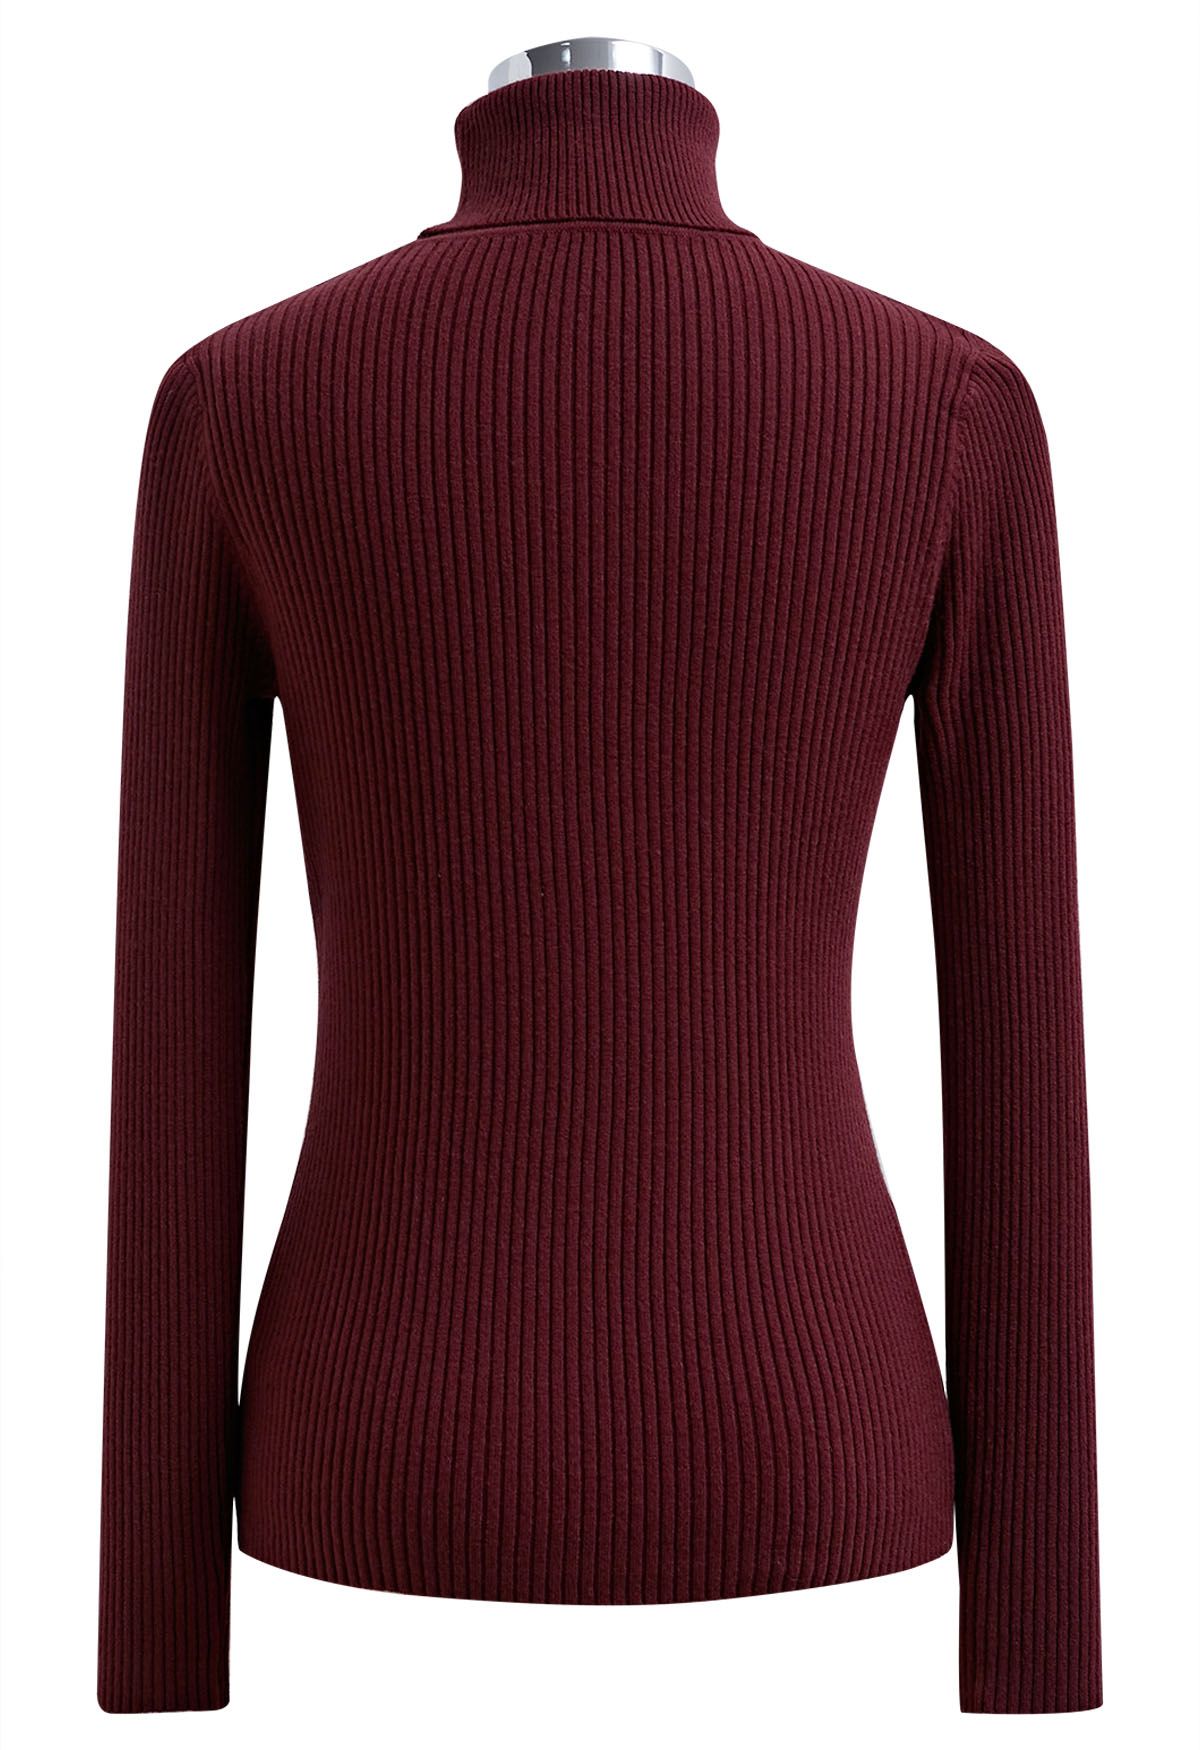 Turtleneck Ribbed Fitted Knit Top in Burgundy